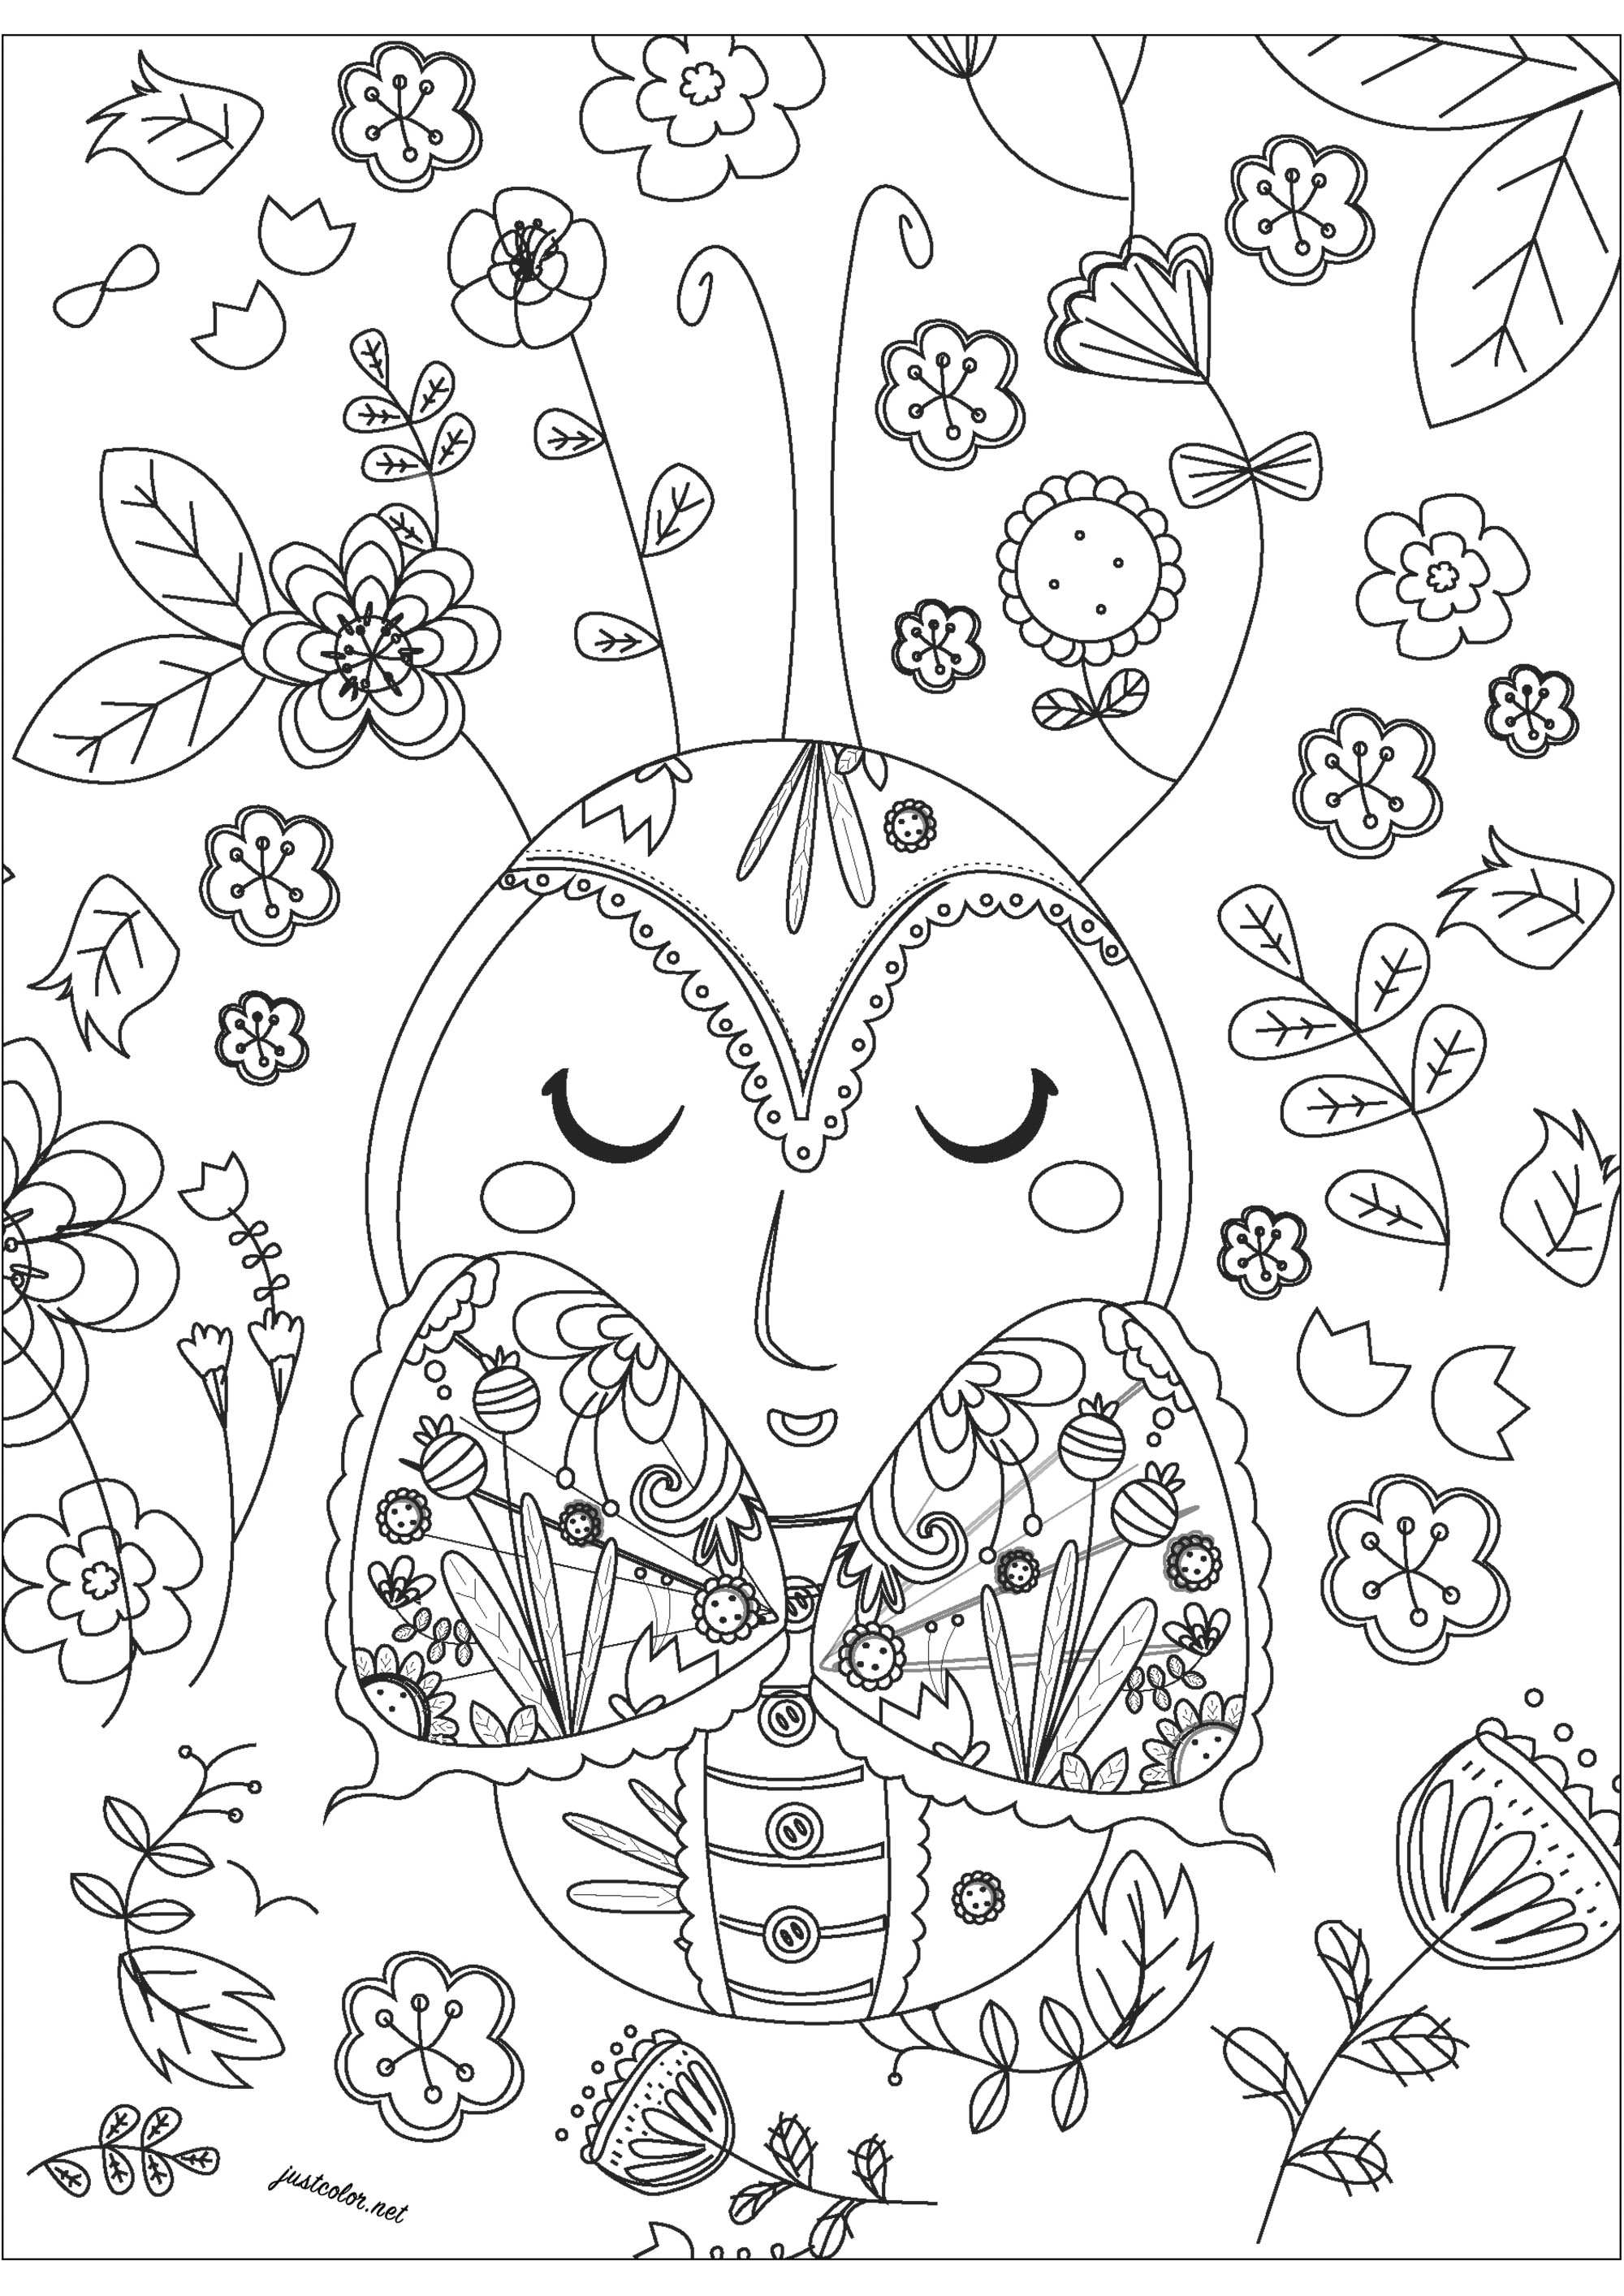 Butterfly with a big body and small wings, with pretty flowers around. A rather simple coloring but full of beautiful details rich and varied, Artist : Gaelle Picard